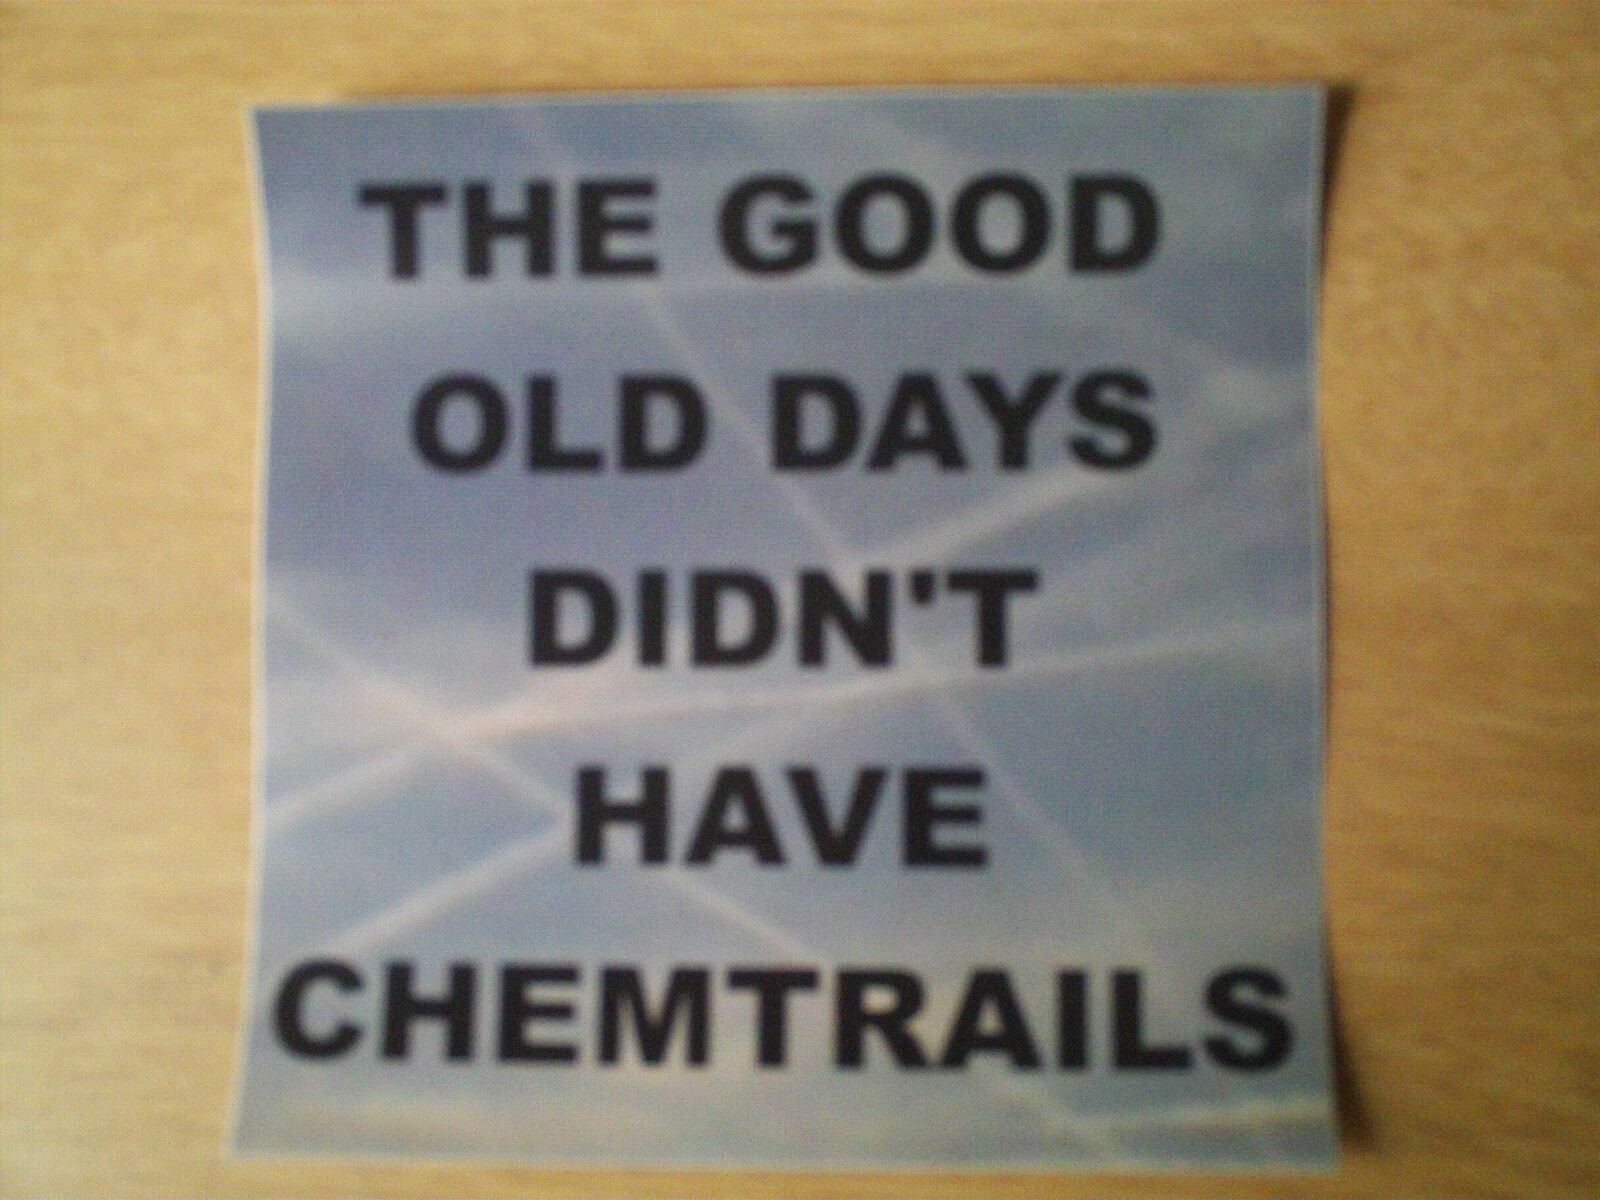 Vinyl 5x5 In. Sticker - `THE GOOD OLD DAYS DIDN'T HAVE CHEMTRAILS' (OVER PHOTO)